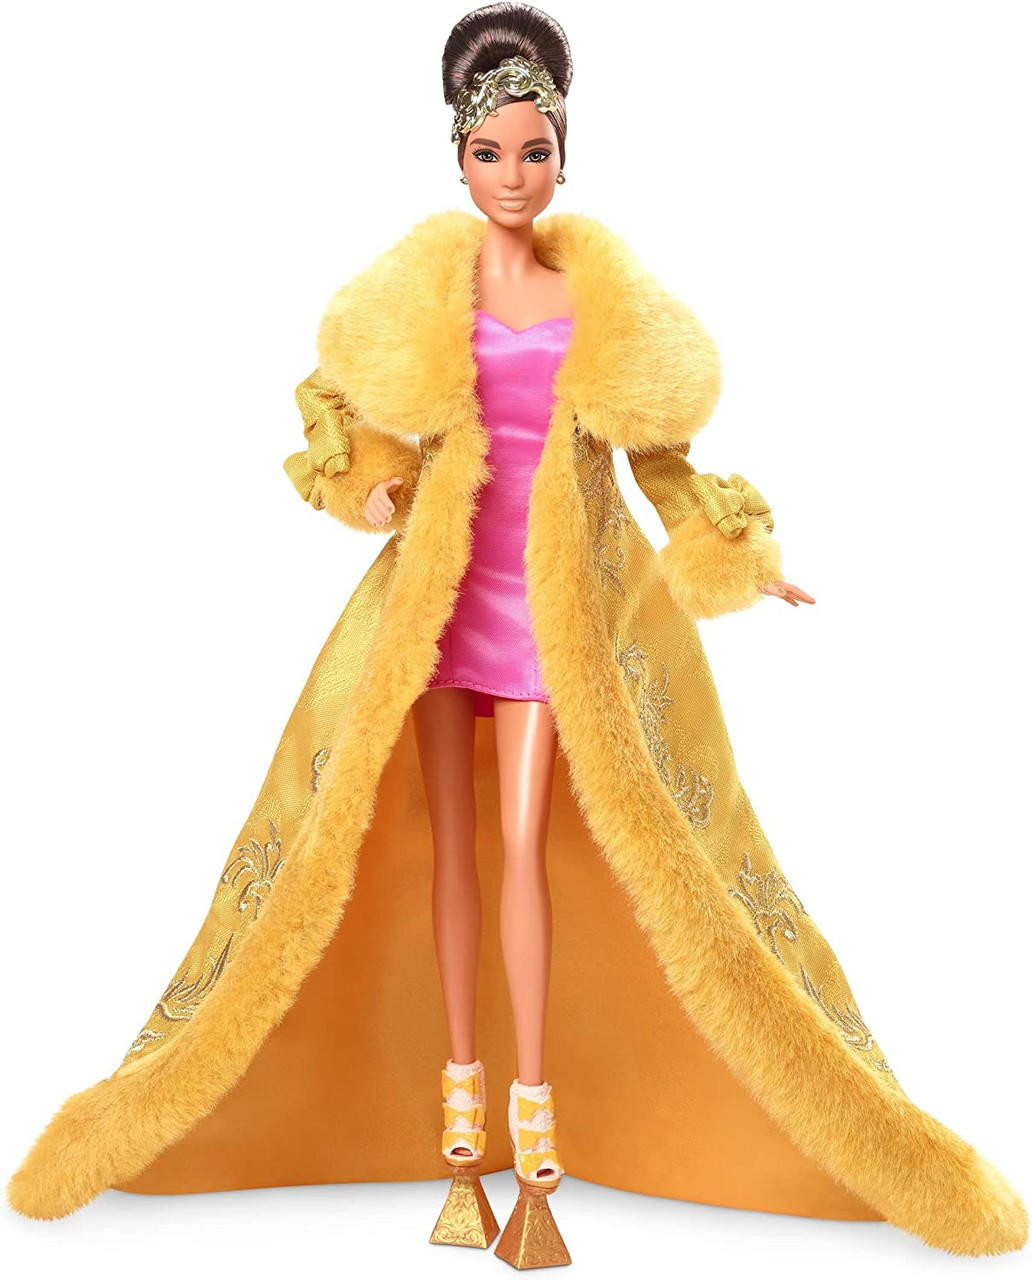 Guo Pei Does Barbie, H&M on Roblox, Tom's of Maine Unveils